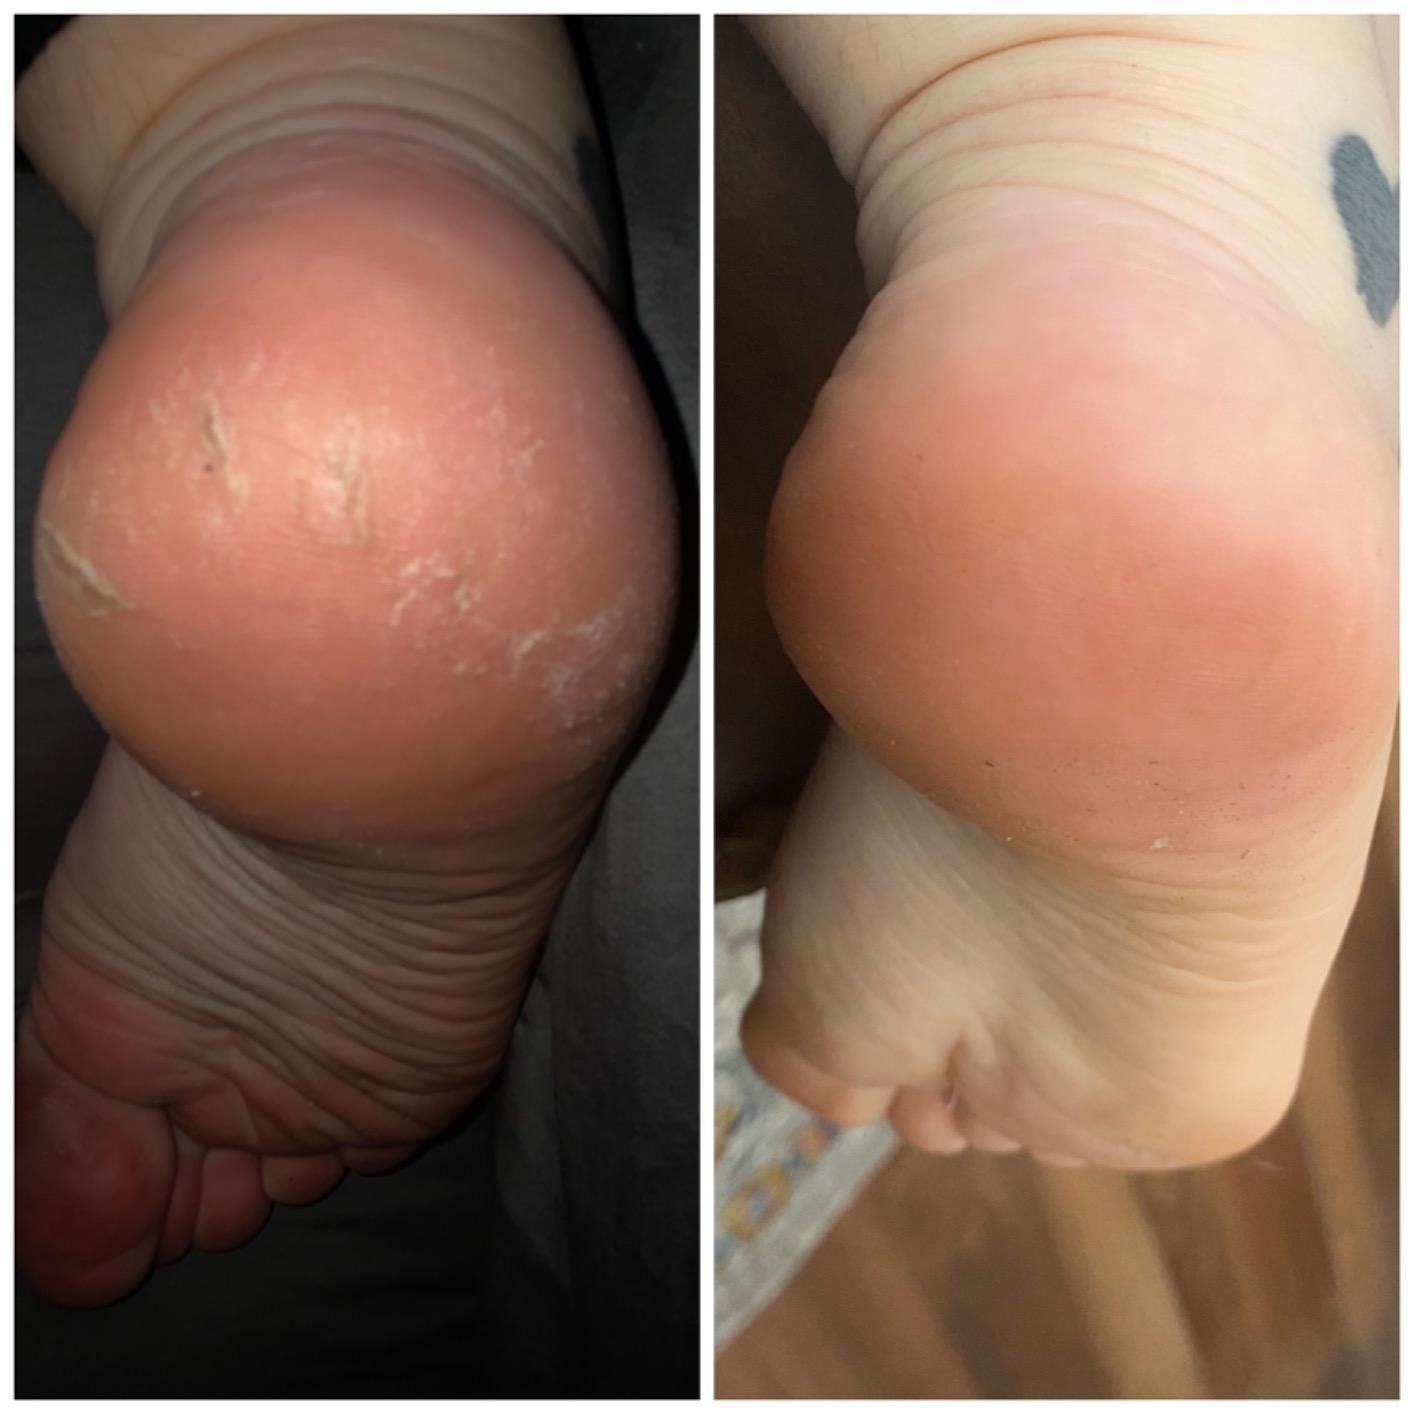 Reviewer showing before-and-after results of using Kerasal Intensive Foot Repair